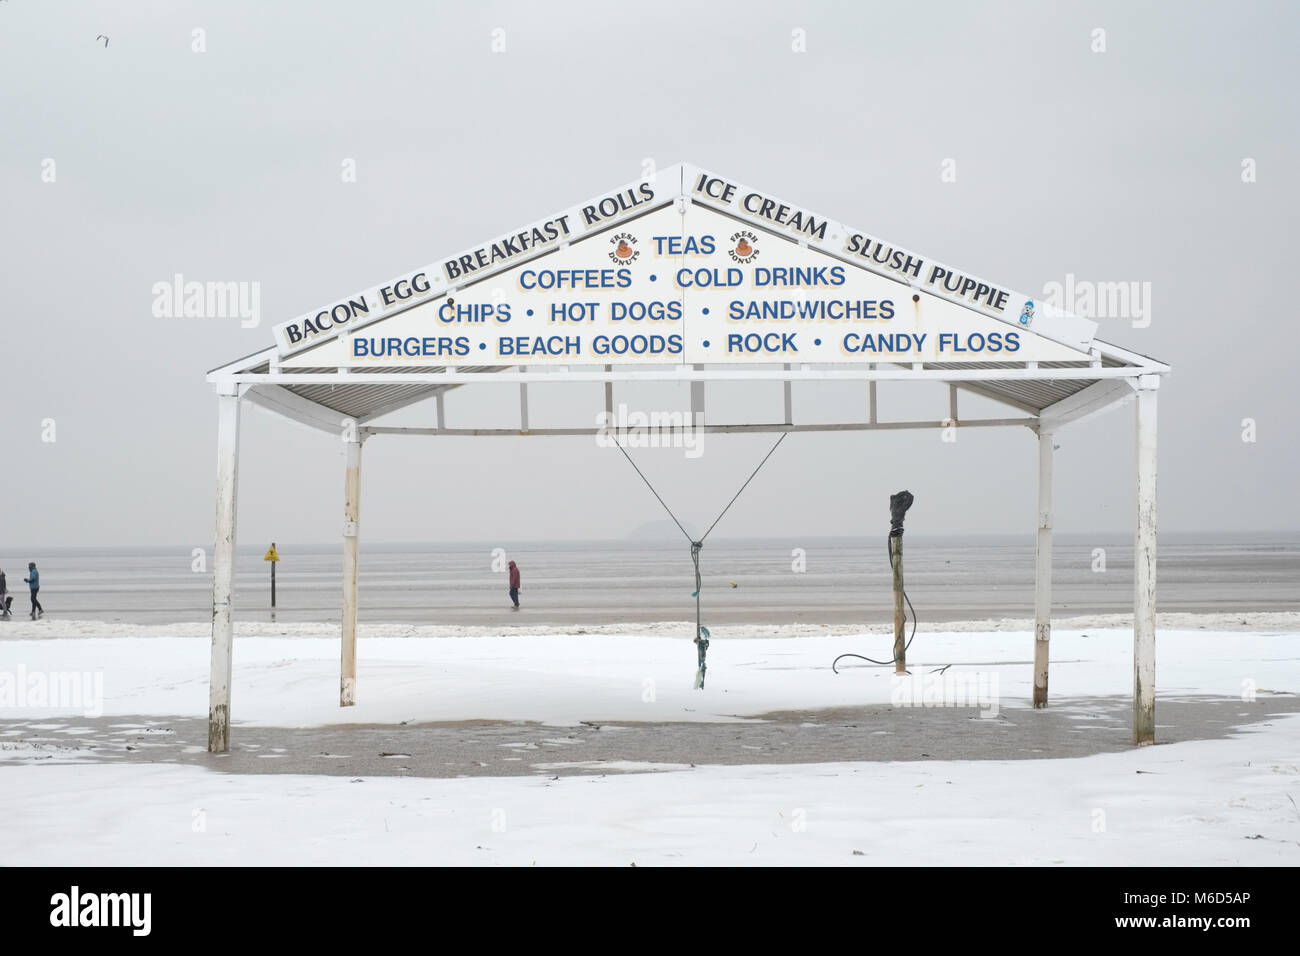 The beach, Weston super mare. UK. 2nd March, 2018. Snow on the beach near a beach side vendors shelter. Credit: Alamy Live News Stock Photo